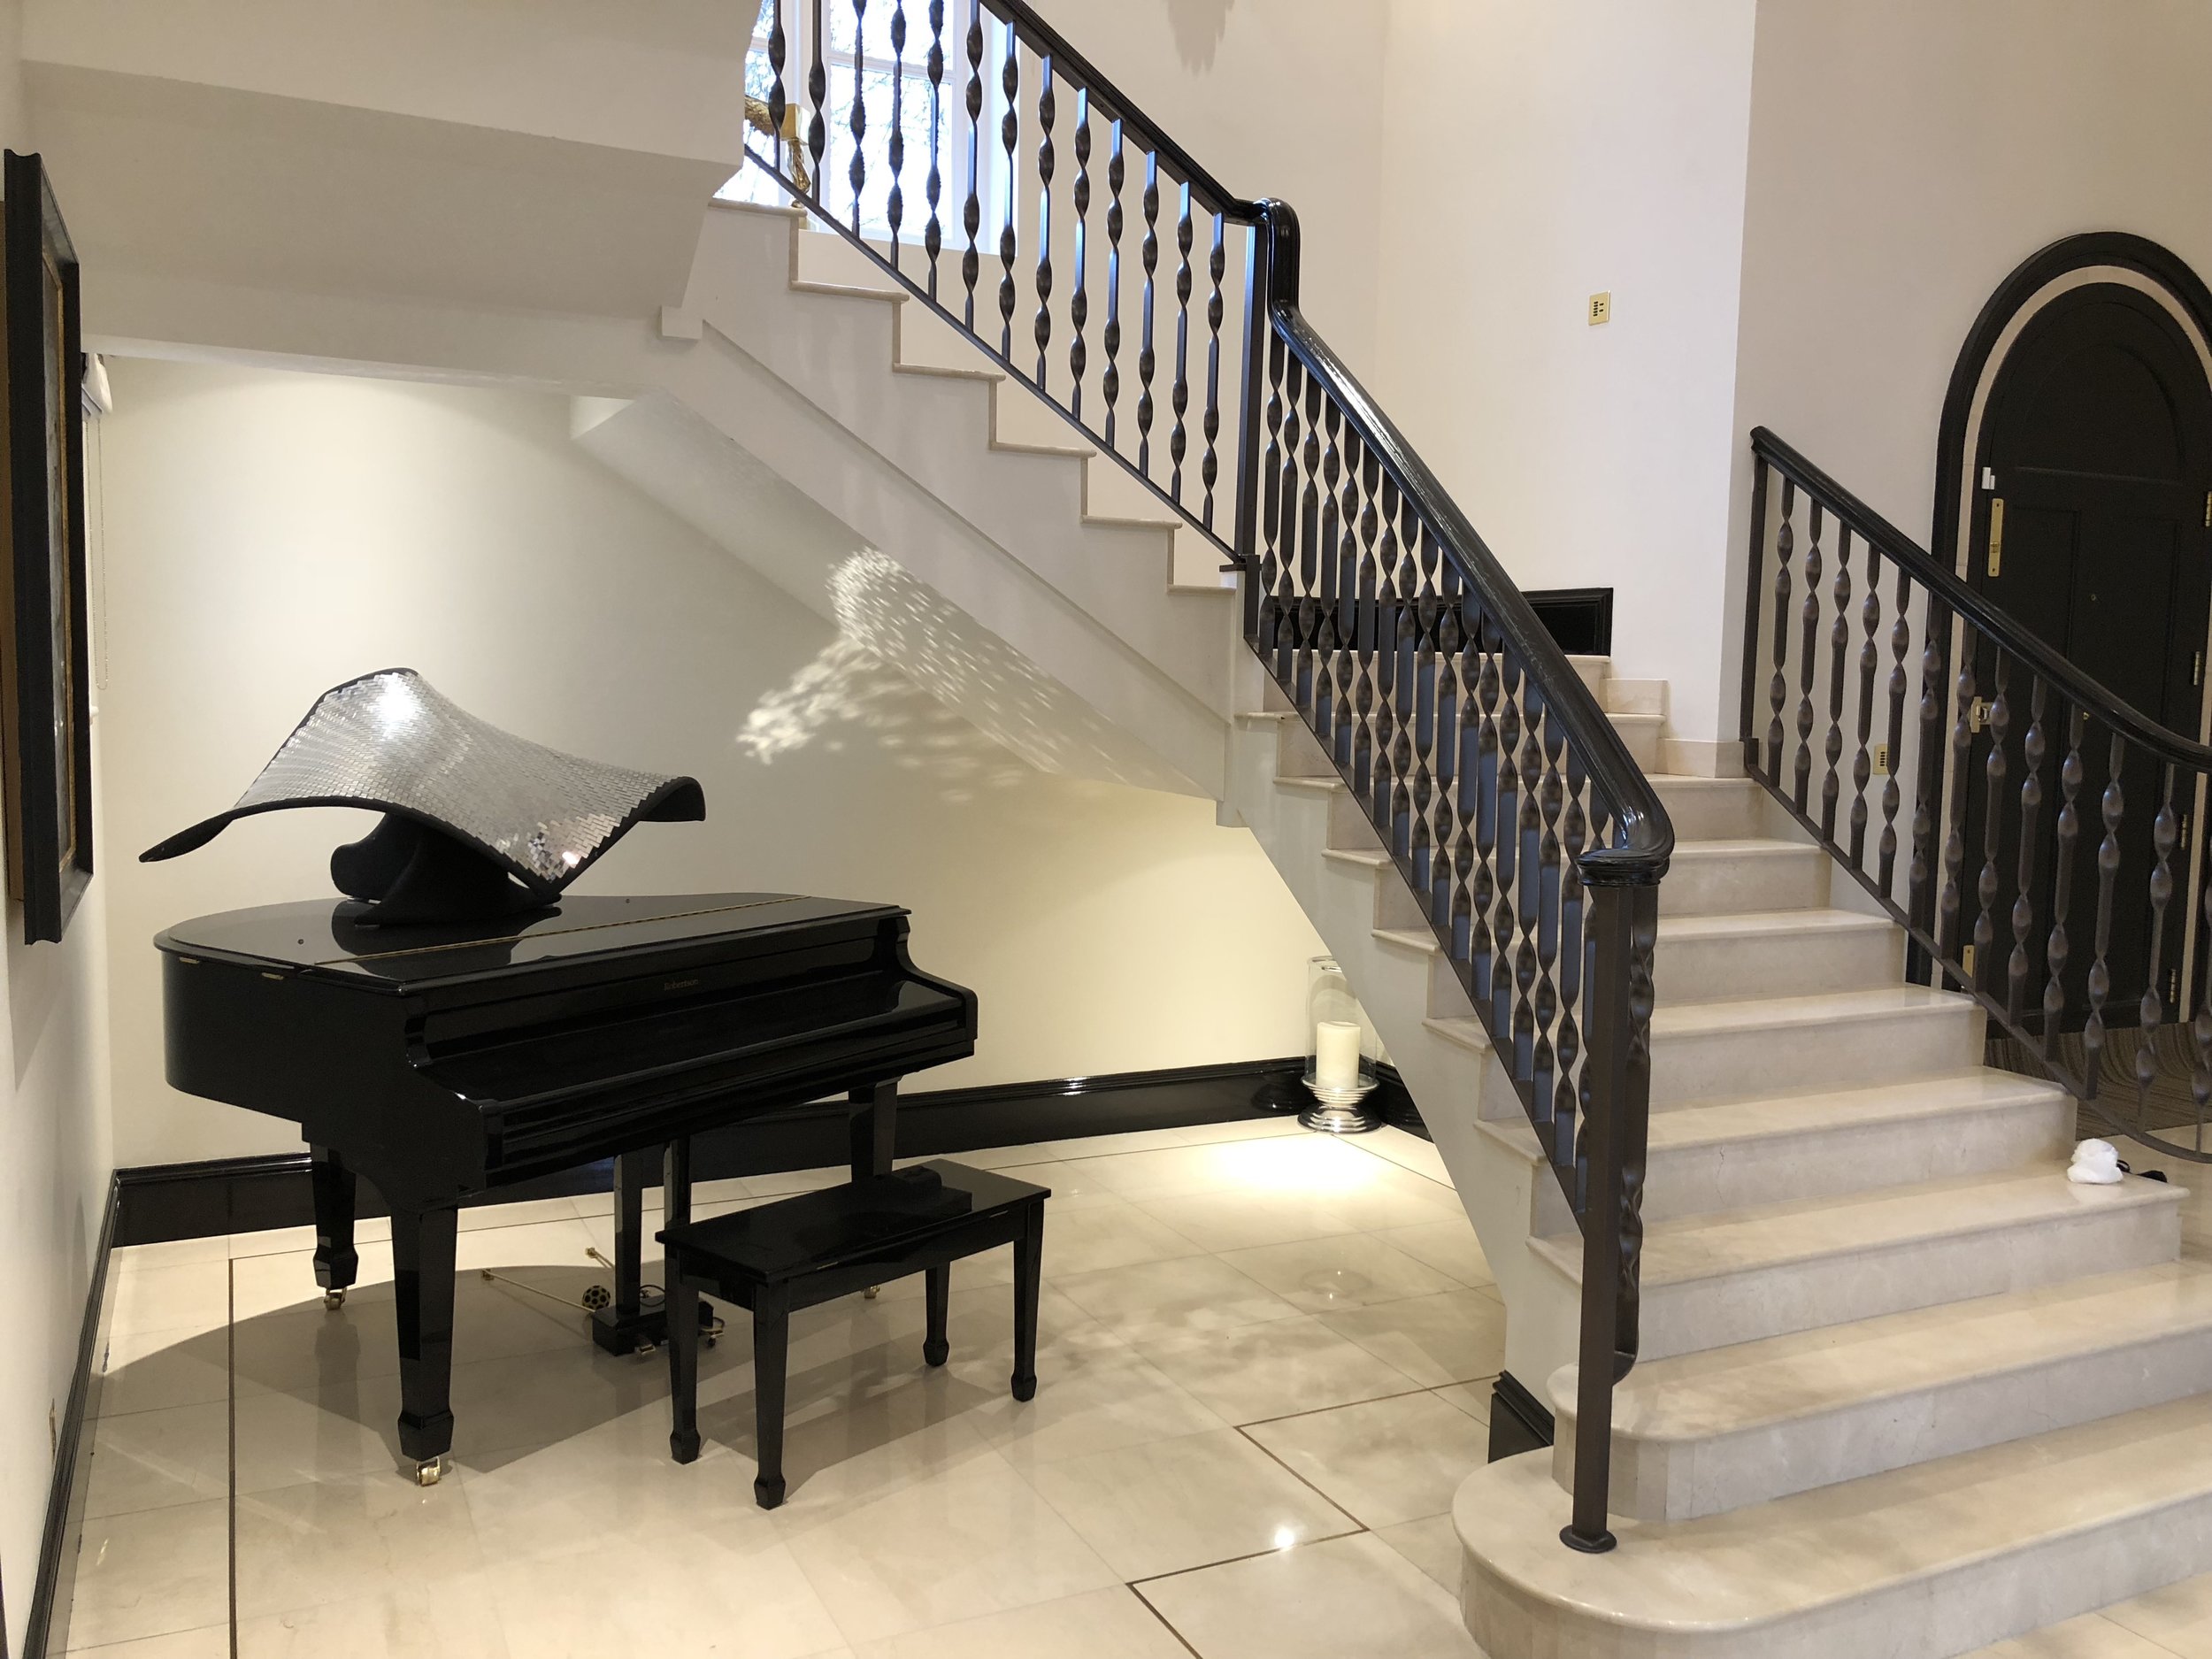 Large hallway with sweeping stairs, piano under the stairs and wall mounted Rako keypad on the stairs